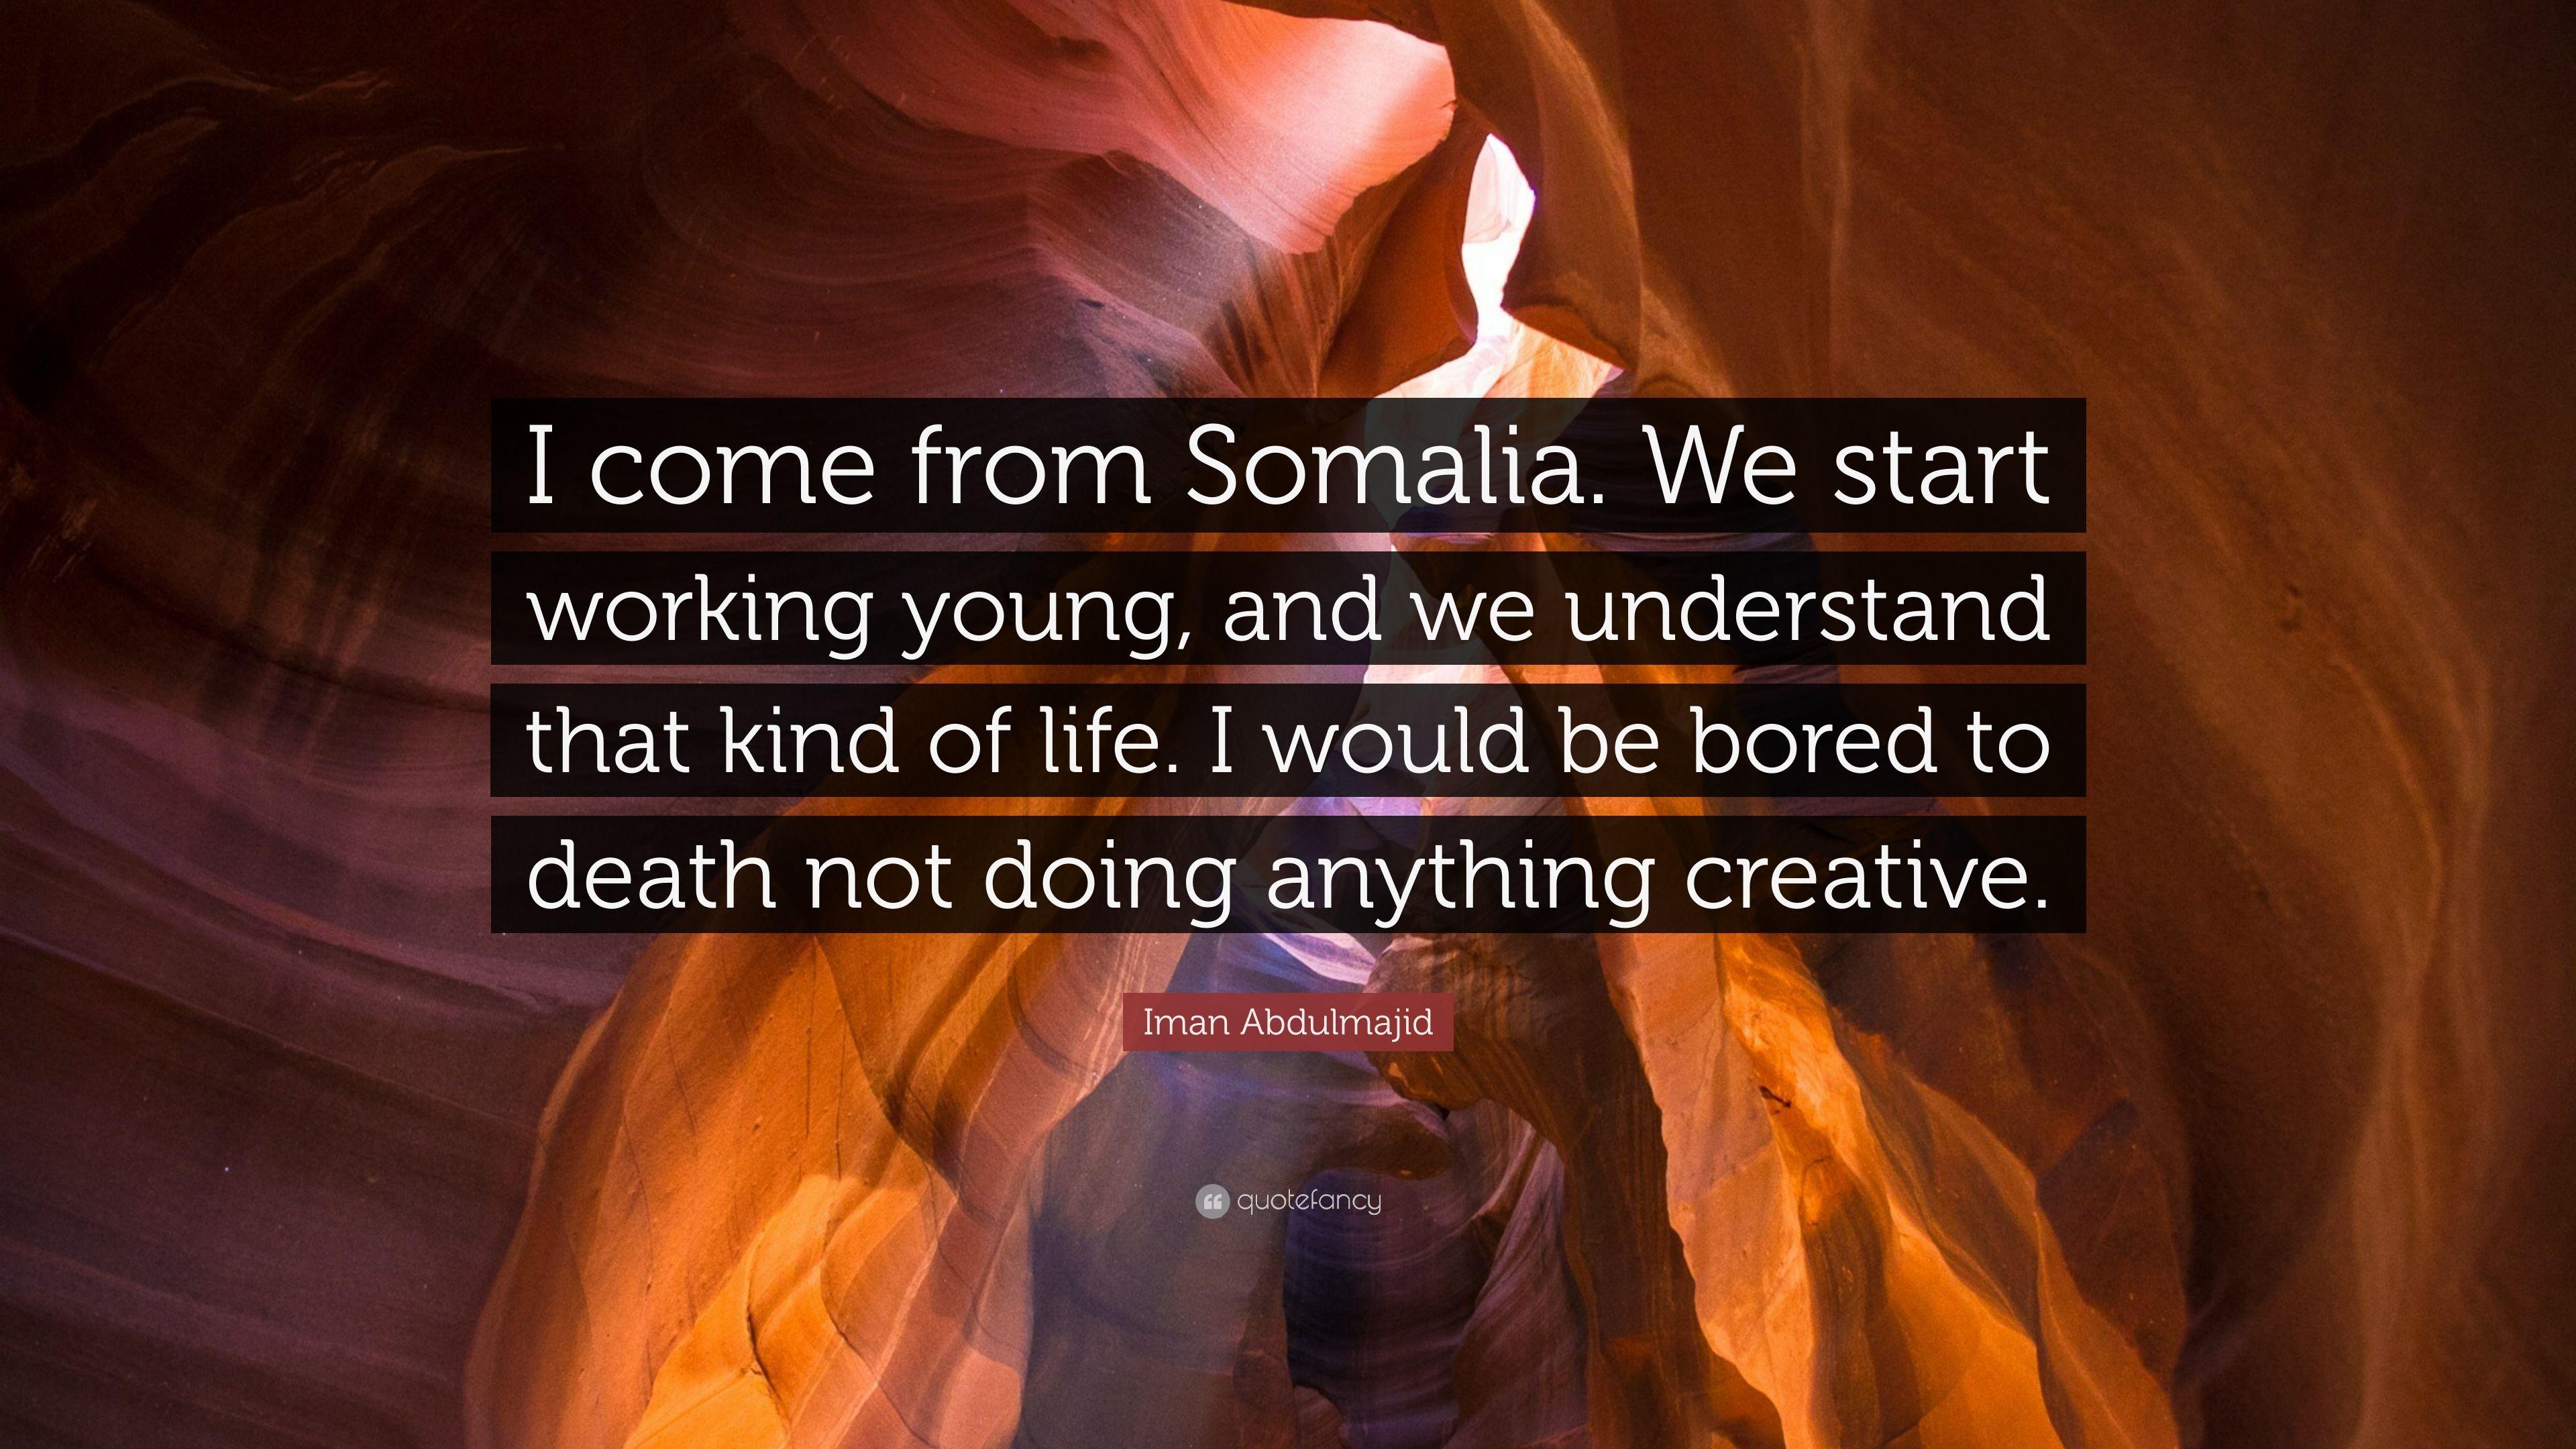 Iman Abdulmajid Quote: “I come from Somalia. We start working young